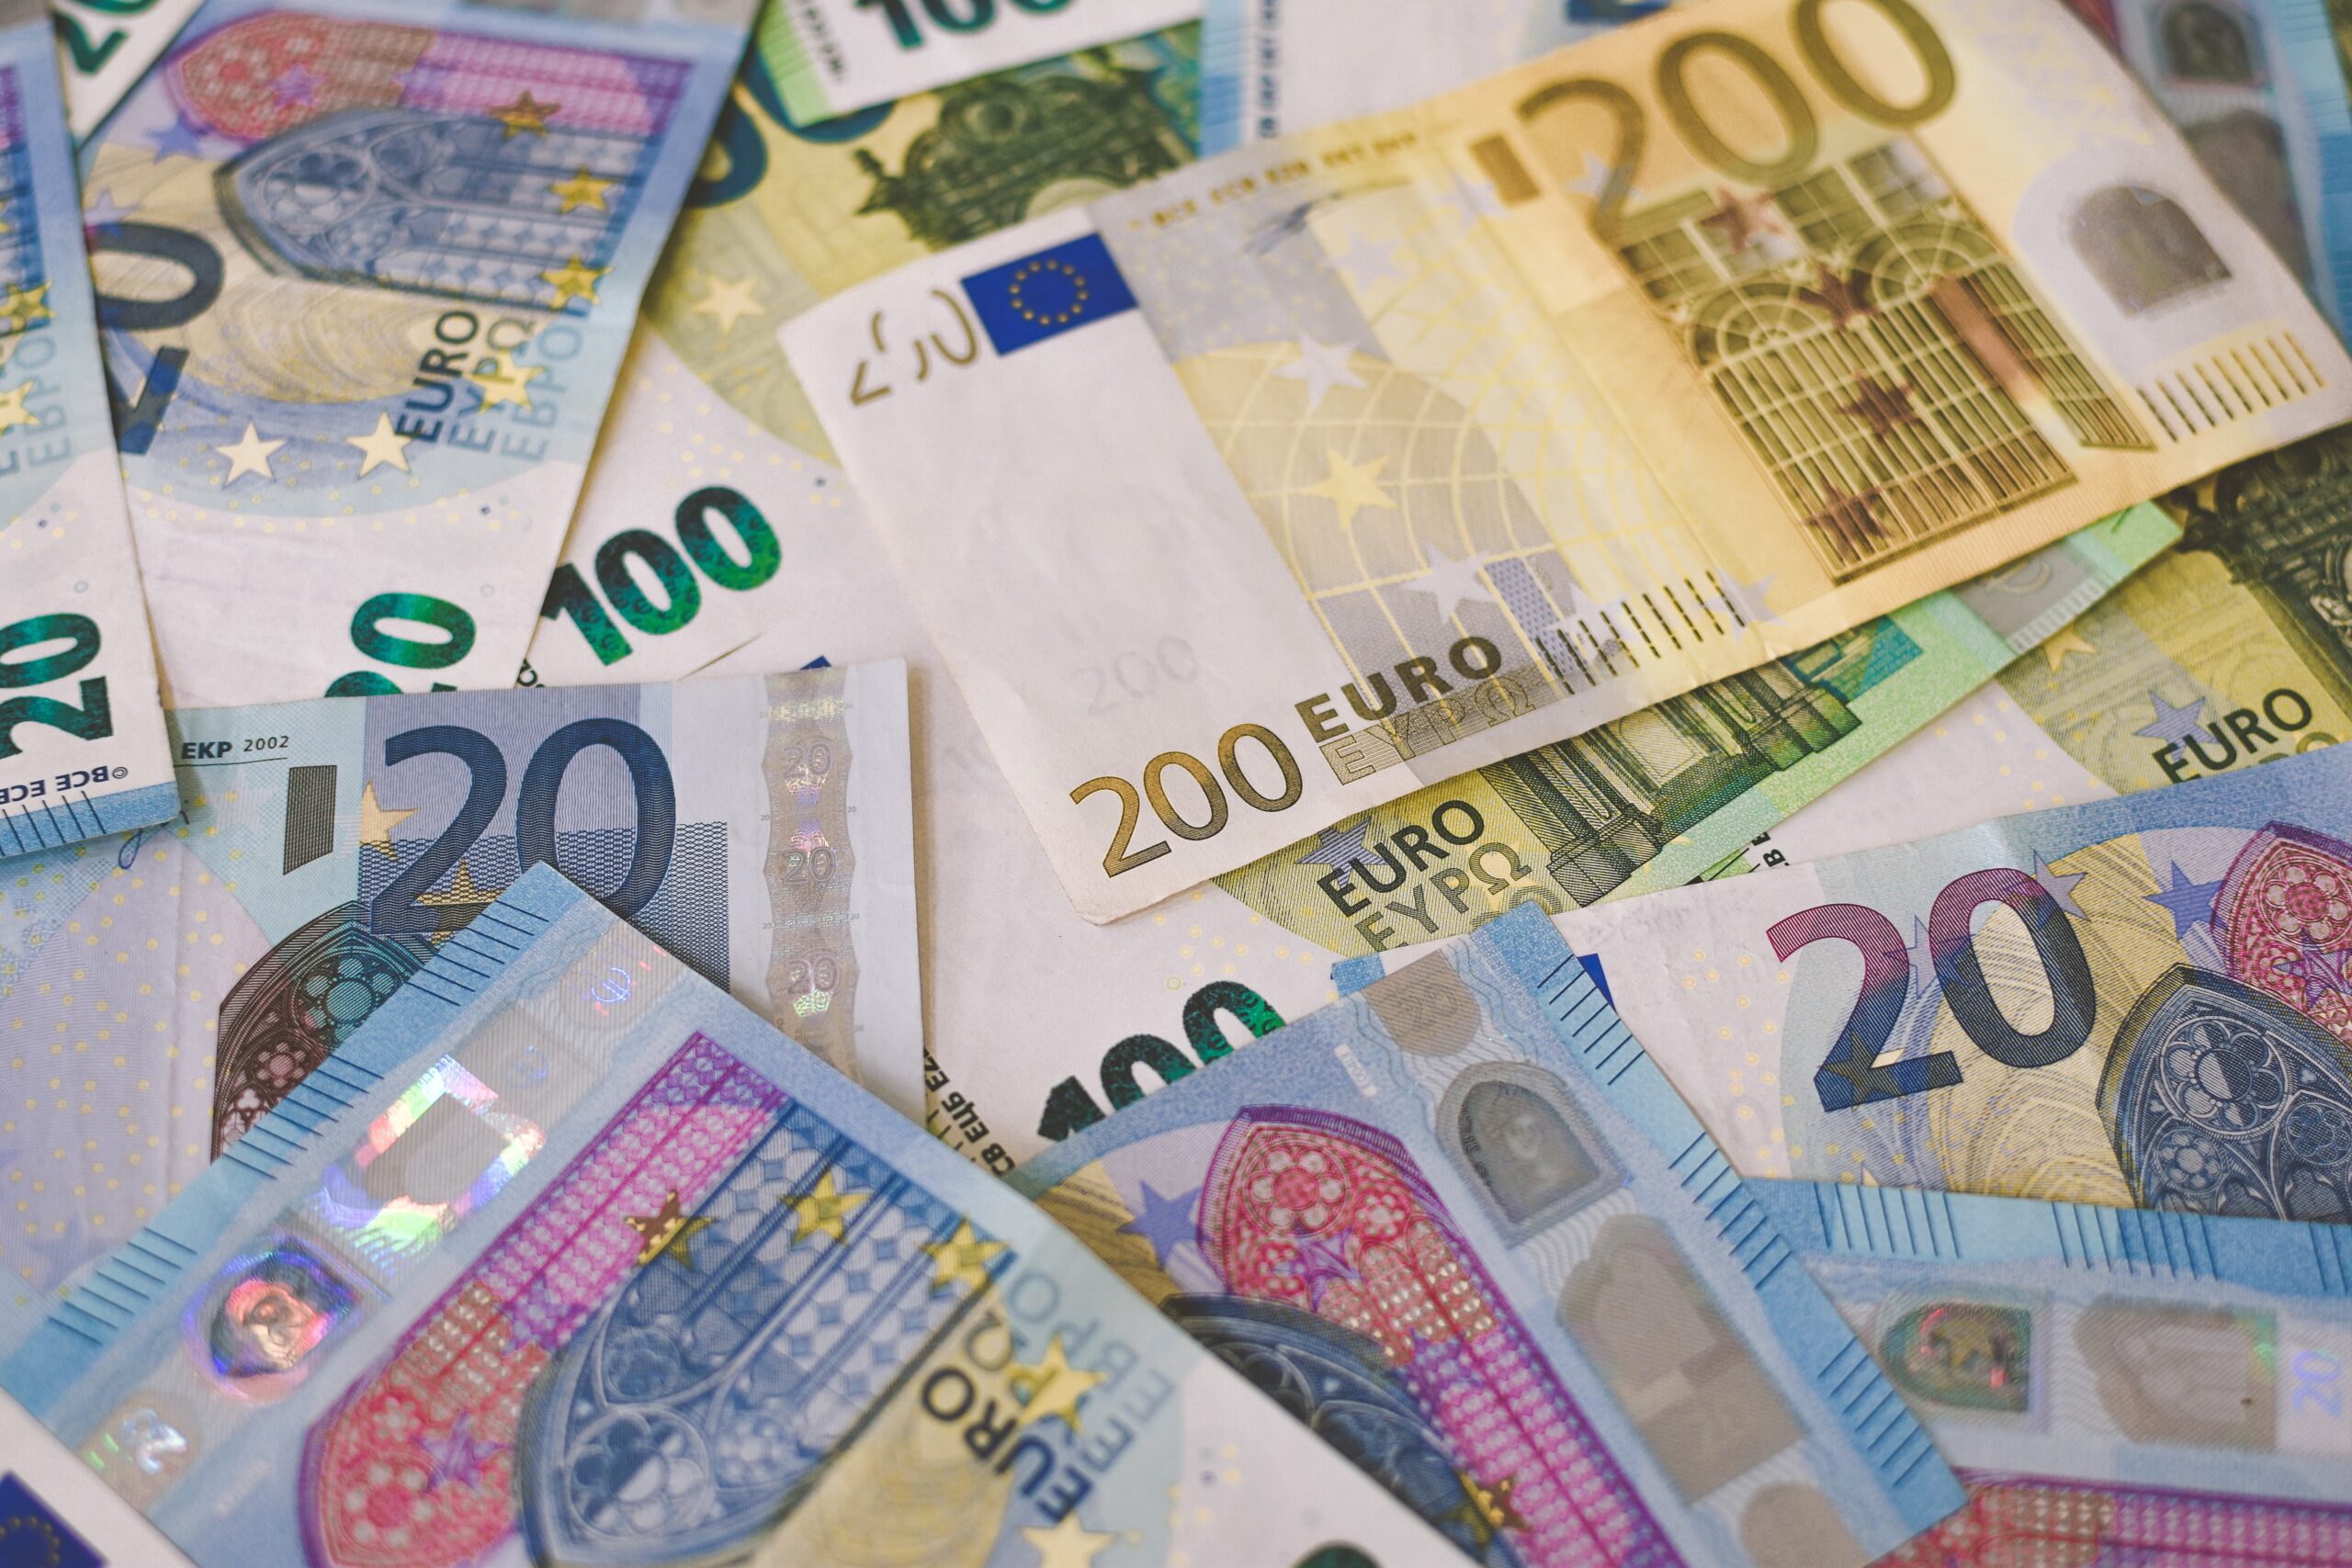 Malta gains access to €120m under EU’s SURE Programme aimed at assisting companies to retain workers